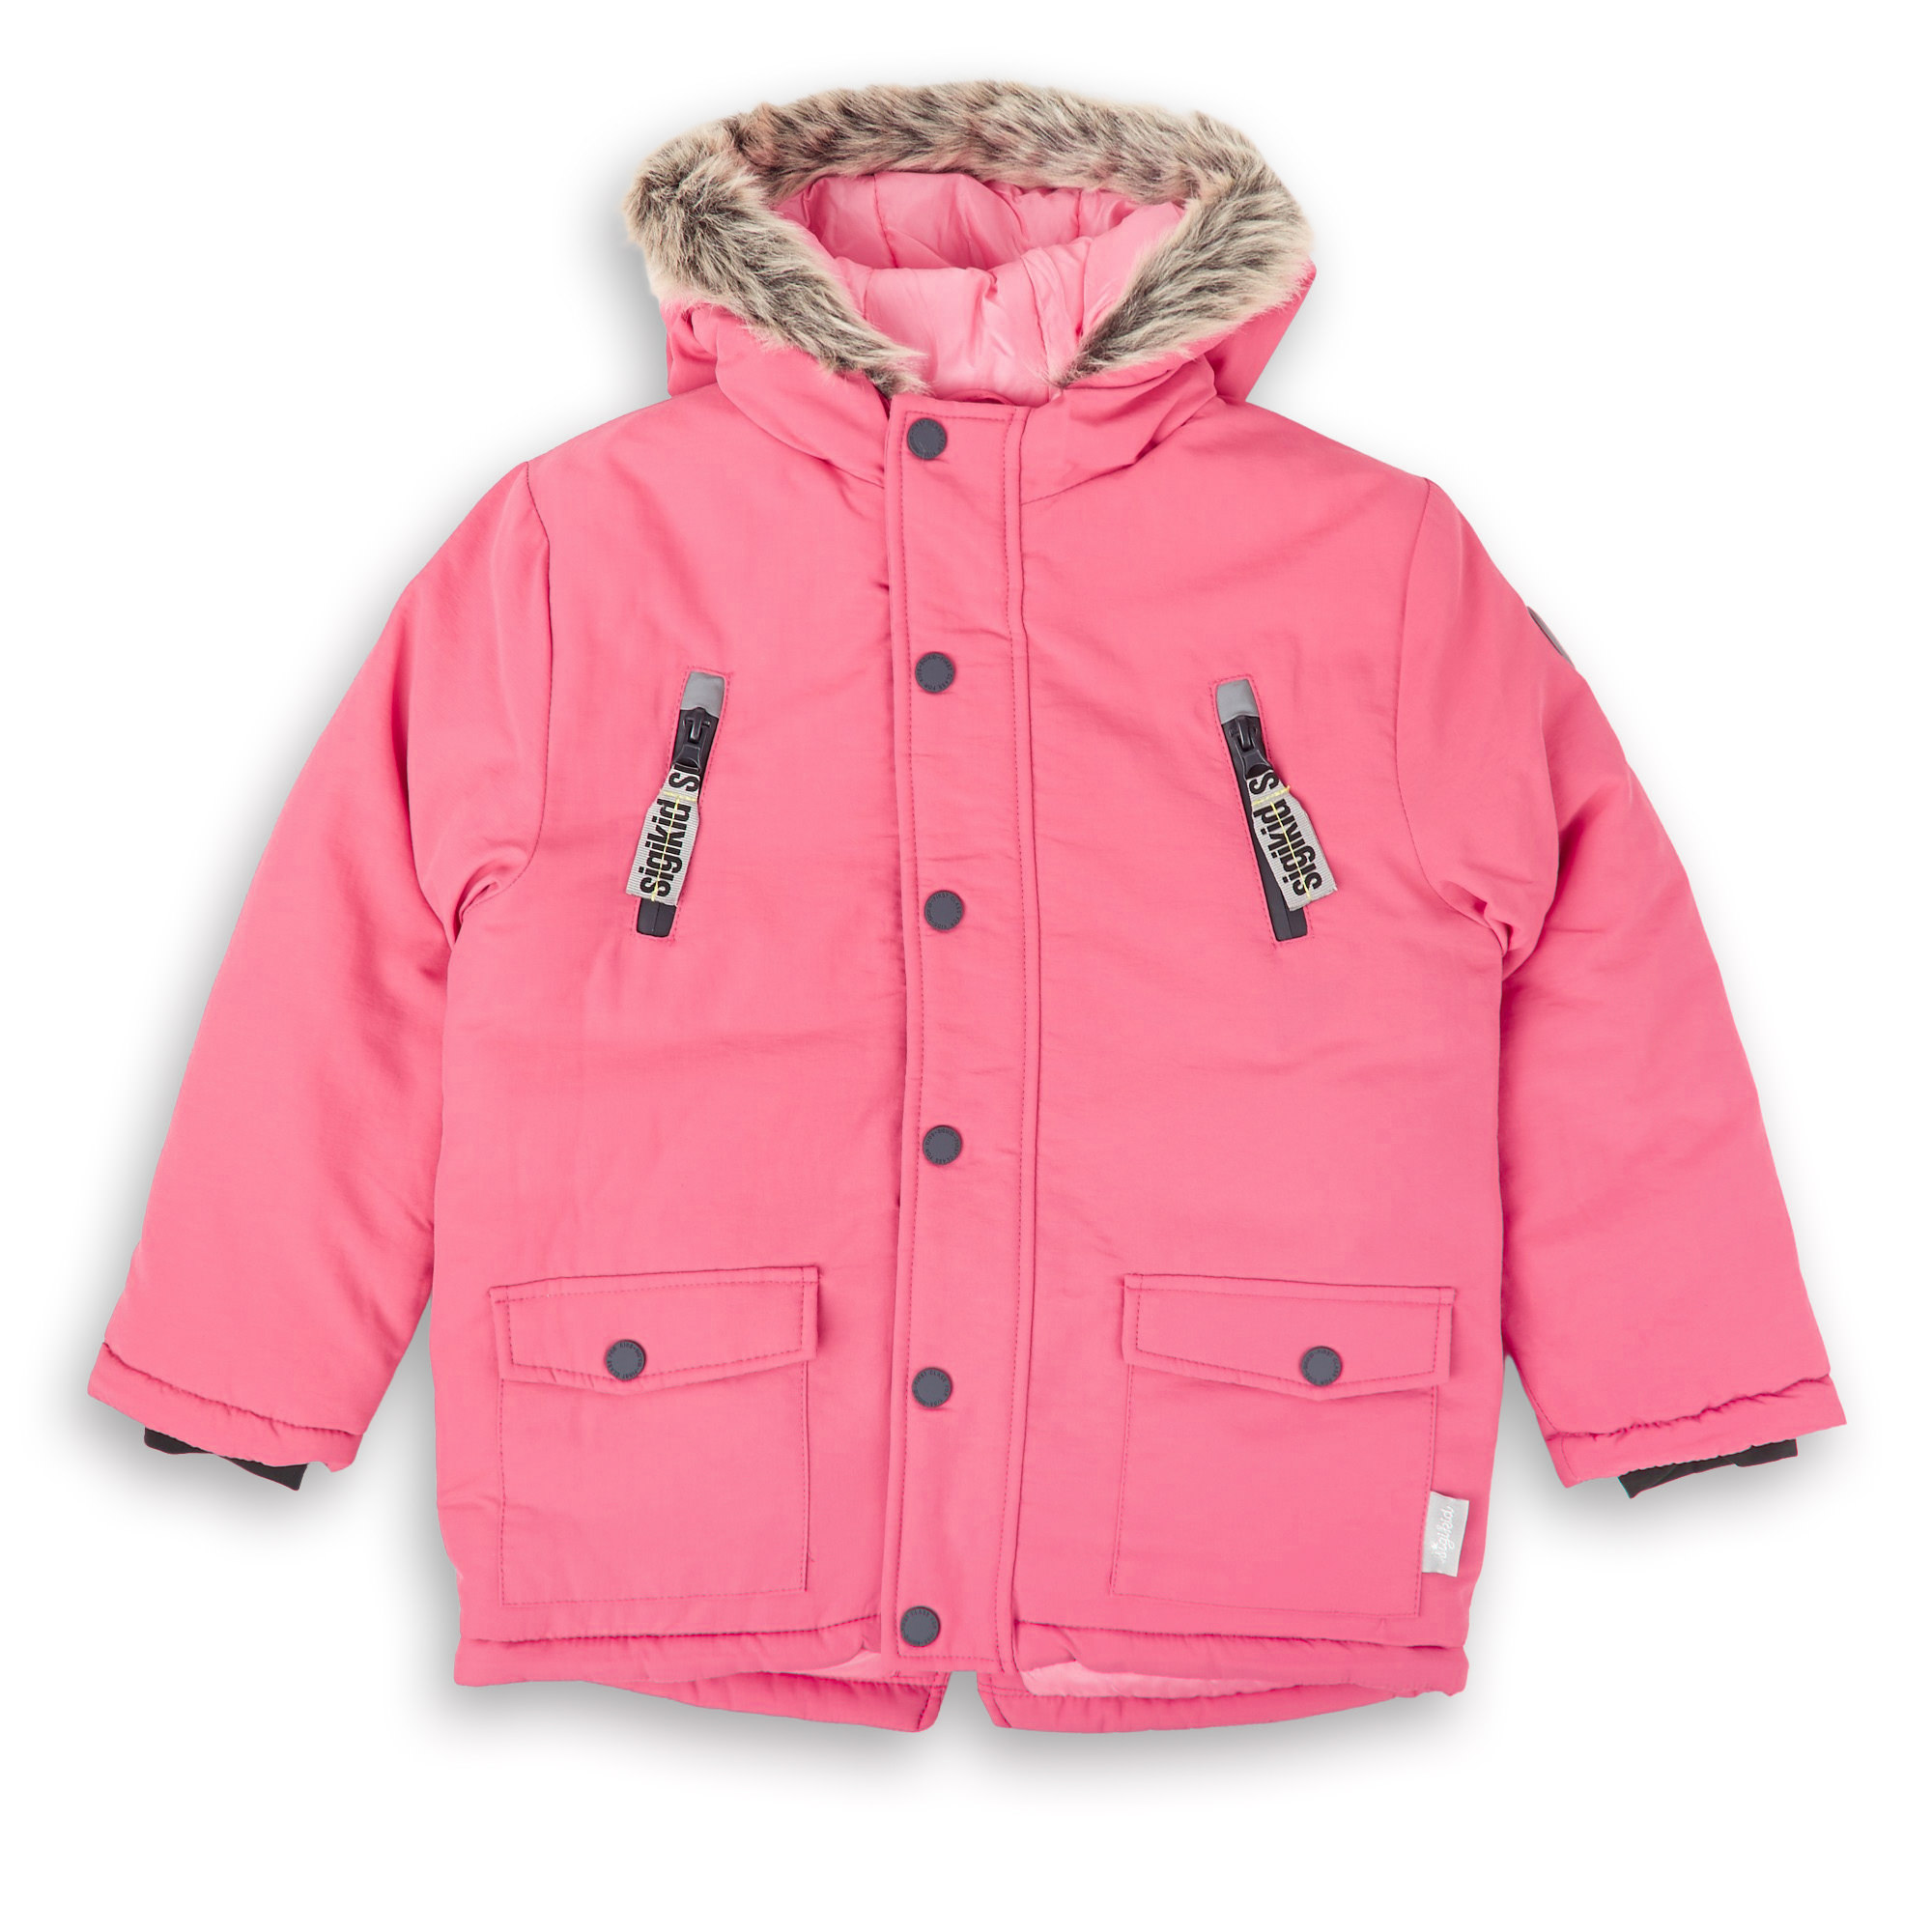 Insulated girls' winter jacket, hooded, pink